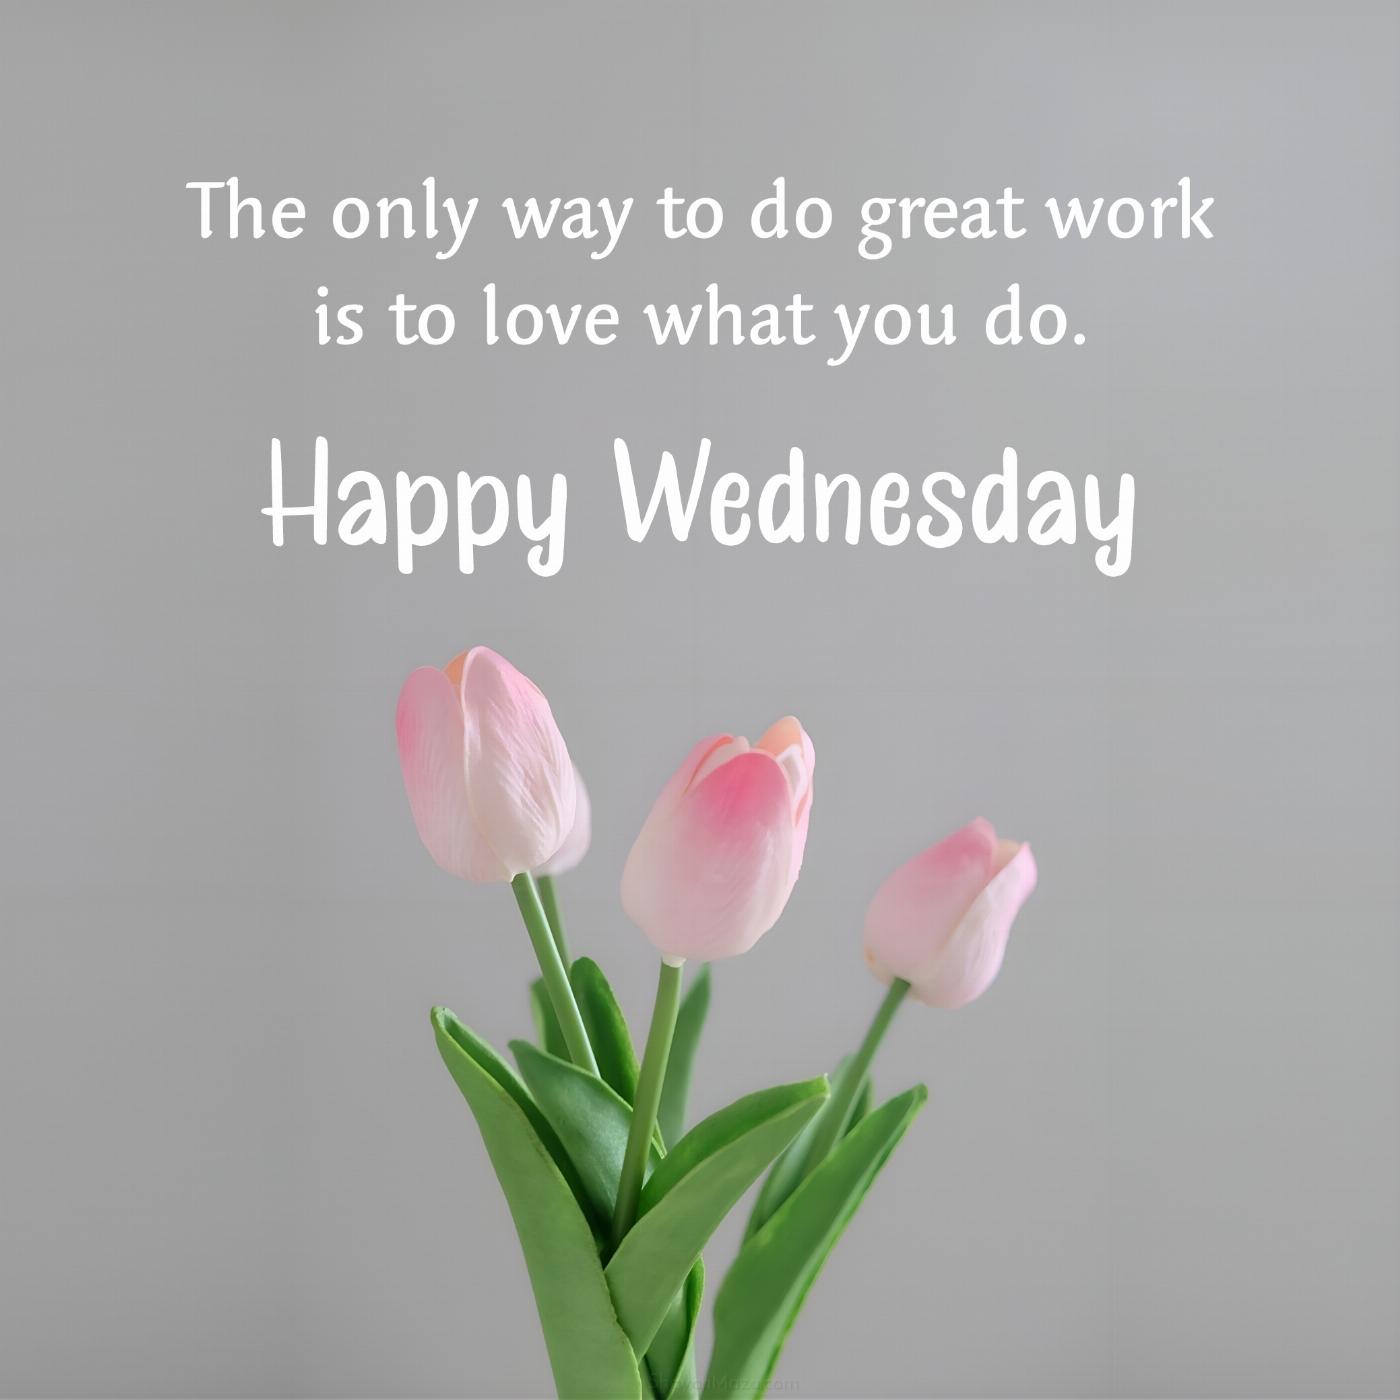 Happy Wednesday! The only way to do great work